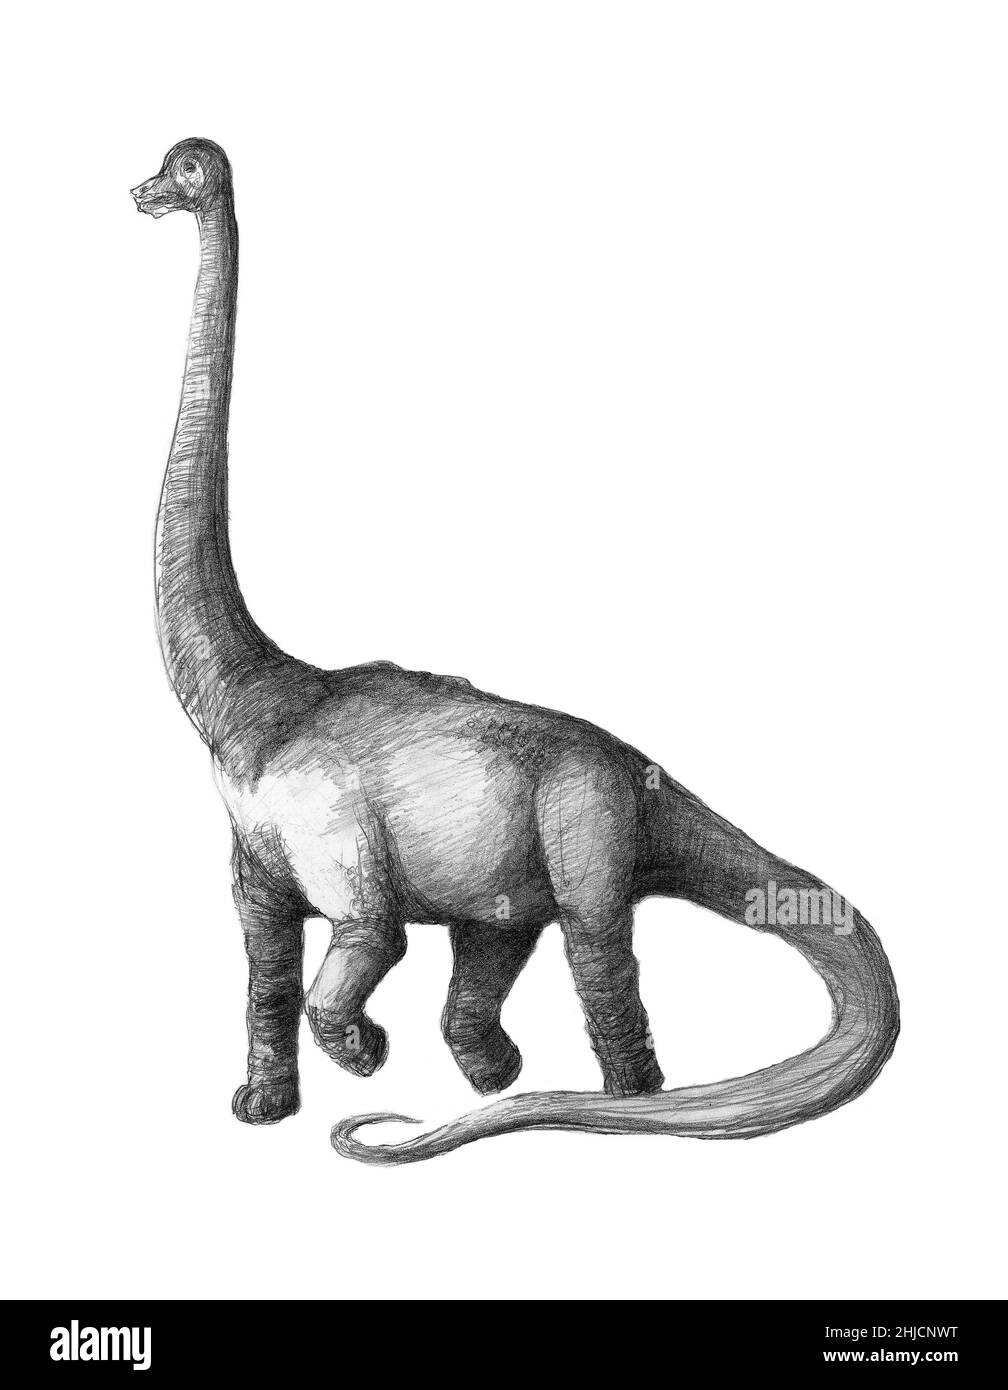 Brachiosaurus dinosaur, artwork. Brachiosaurus was the tallest dinosaur, standing up to 16 meters tall. Unusually for a dinosaur, its front legs were longer than its hind legs. It is thought that it fed on the high leaves of trees, as giraffes do today. Fossils of Brachiosaurus have been found in North America and Africa. It lived in the late Jurassic period, between 155 and 145 million years ago. It is thought that Brachiosaurus lived in herds, although a fully- grown adult would have had little to fear from predators. Stock Photo